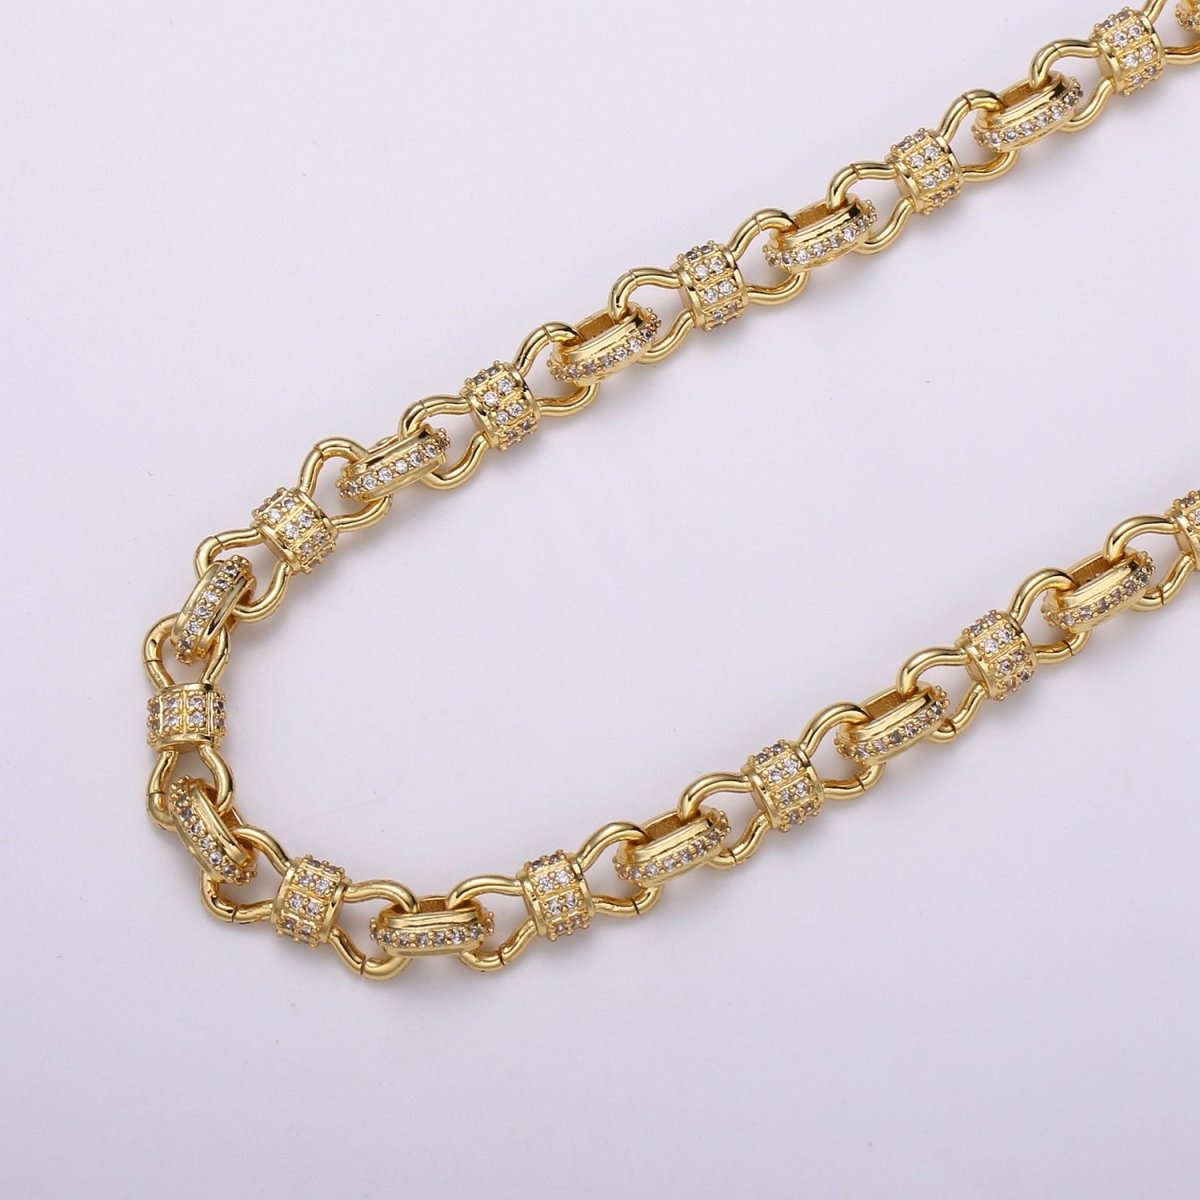 Gold Micro Pave Chain 24K Gold Filled CZ Oval Cable Chain by Meter for Statement Jewelry Making, Unfinished Chain | ROLL-449 (O-075), ROLL-450 (O-076) Clearance Pricing - DLUXCA